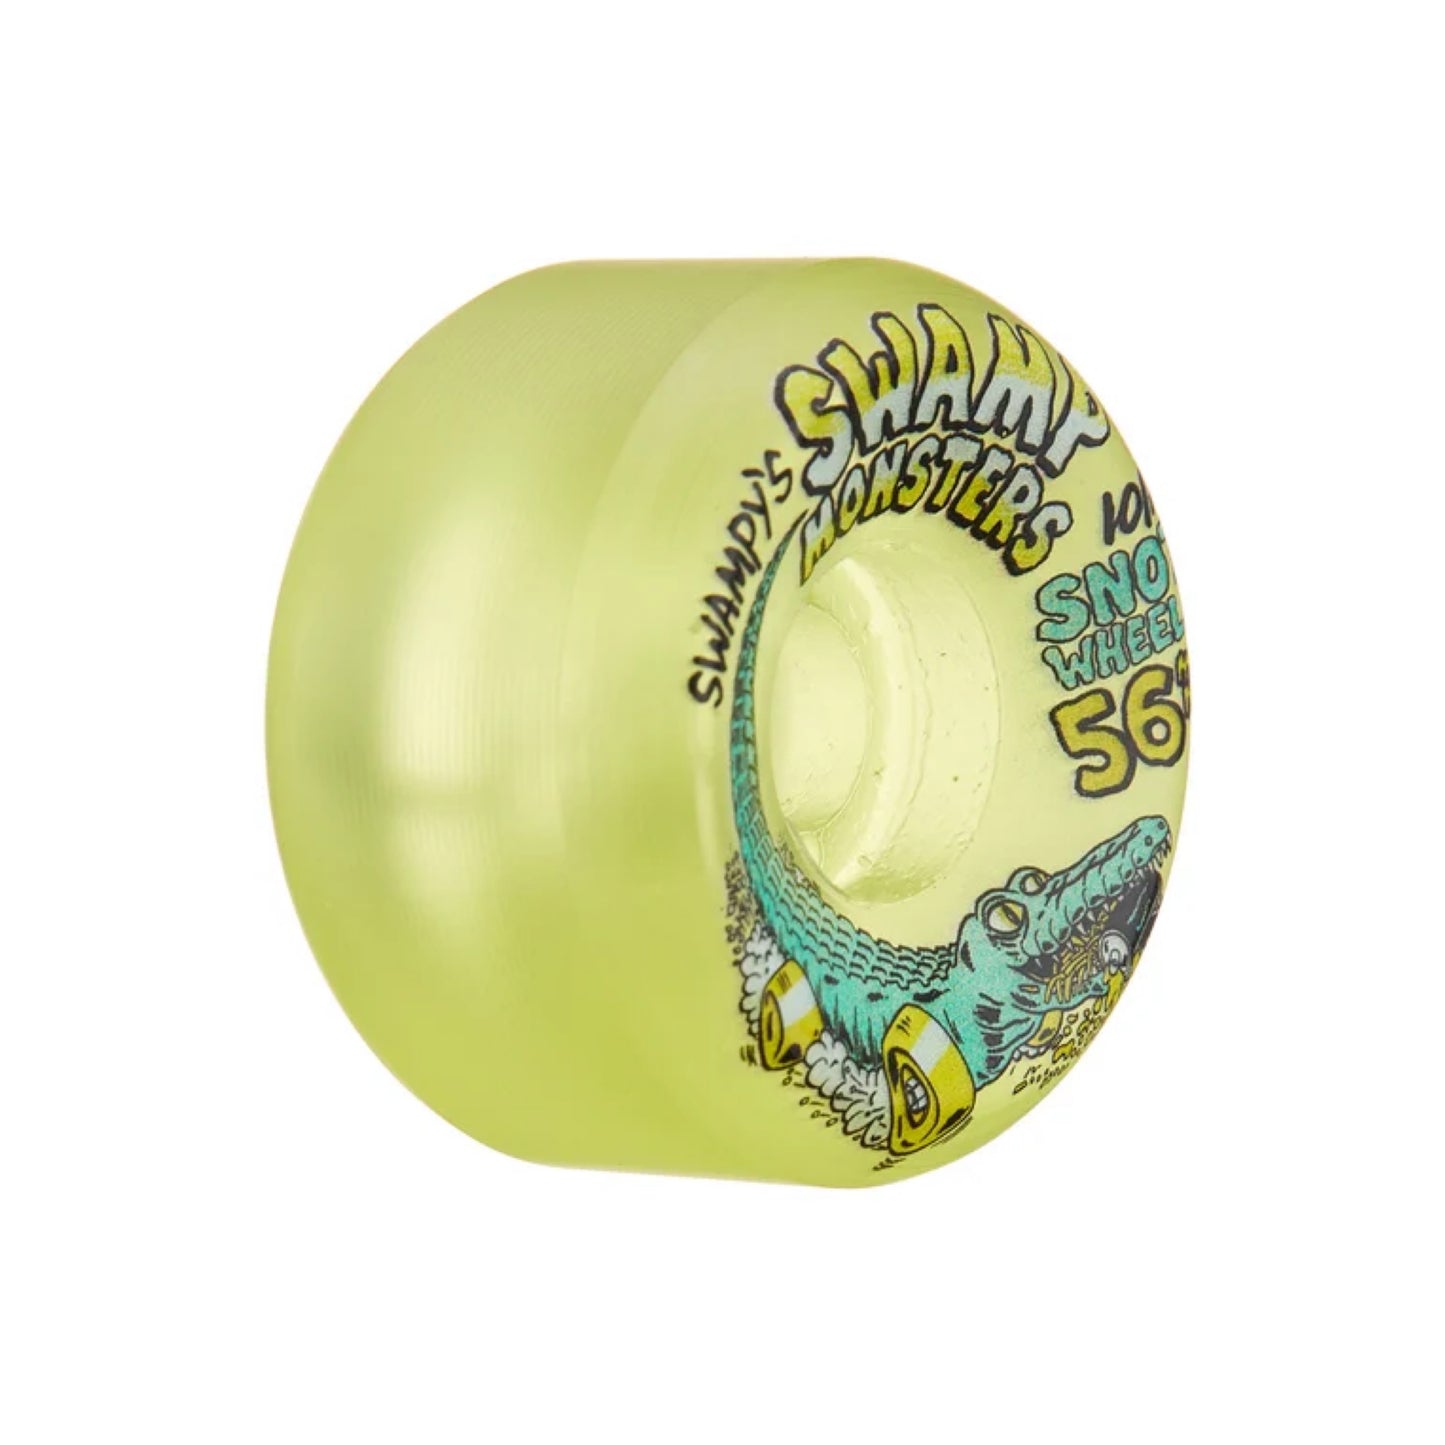 Snot Swampy Swamp Monsters 56mm Clear Yellow Skateboard Wheels